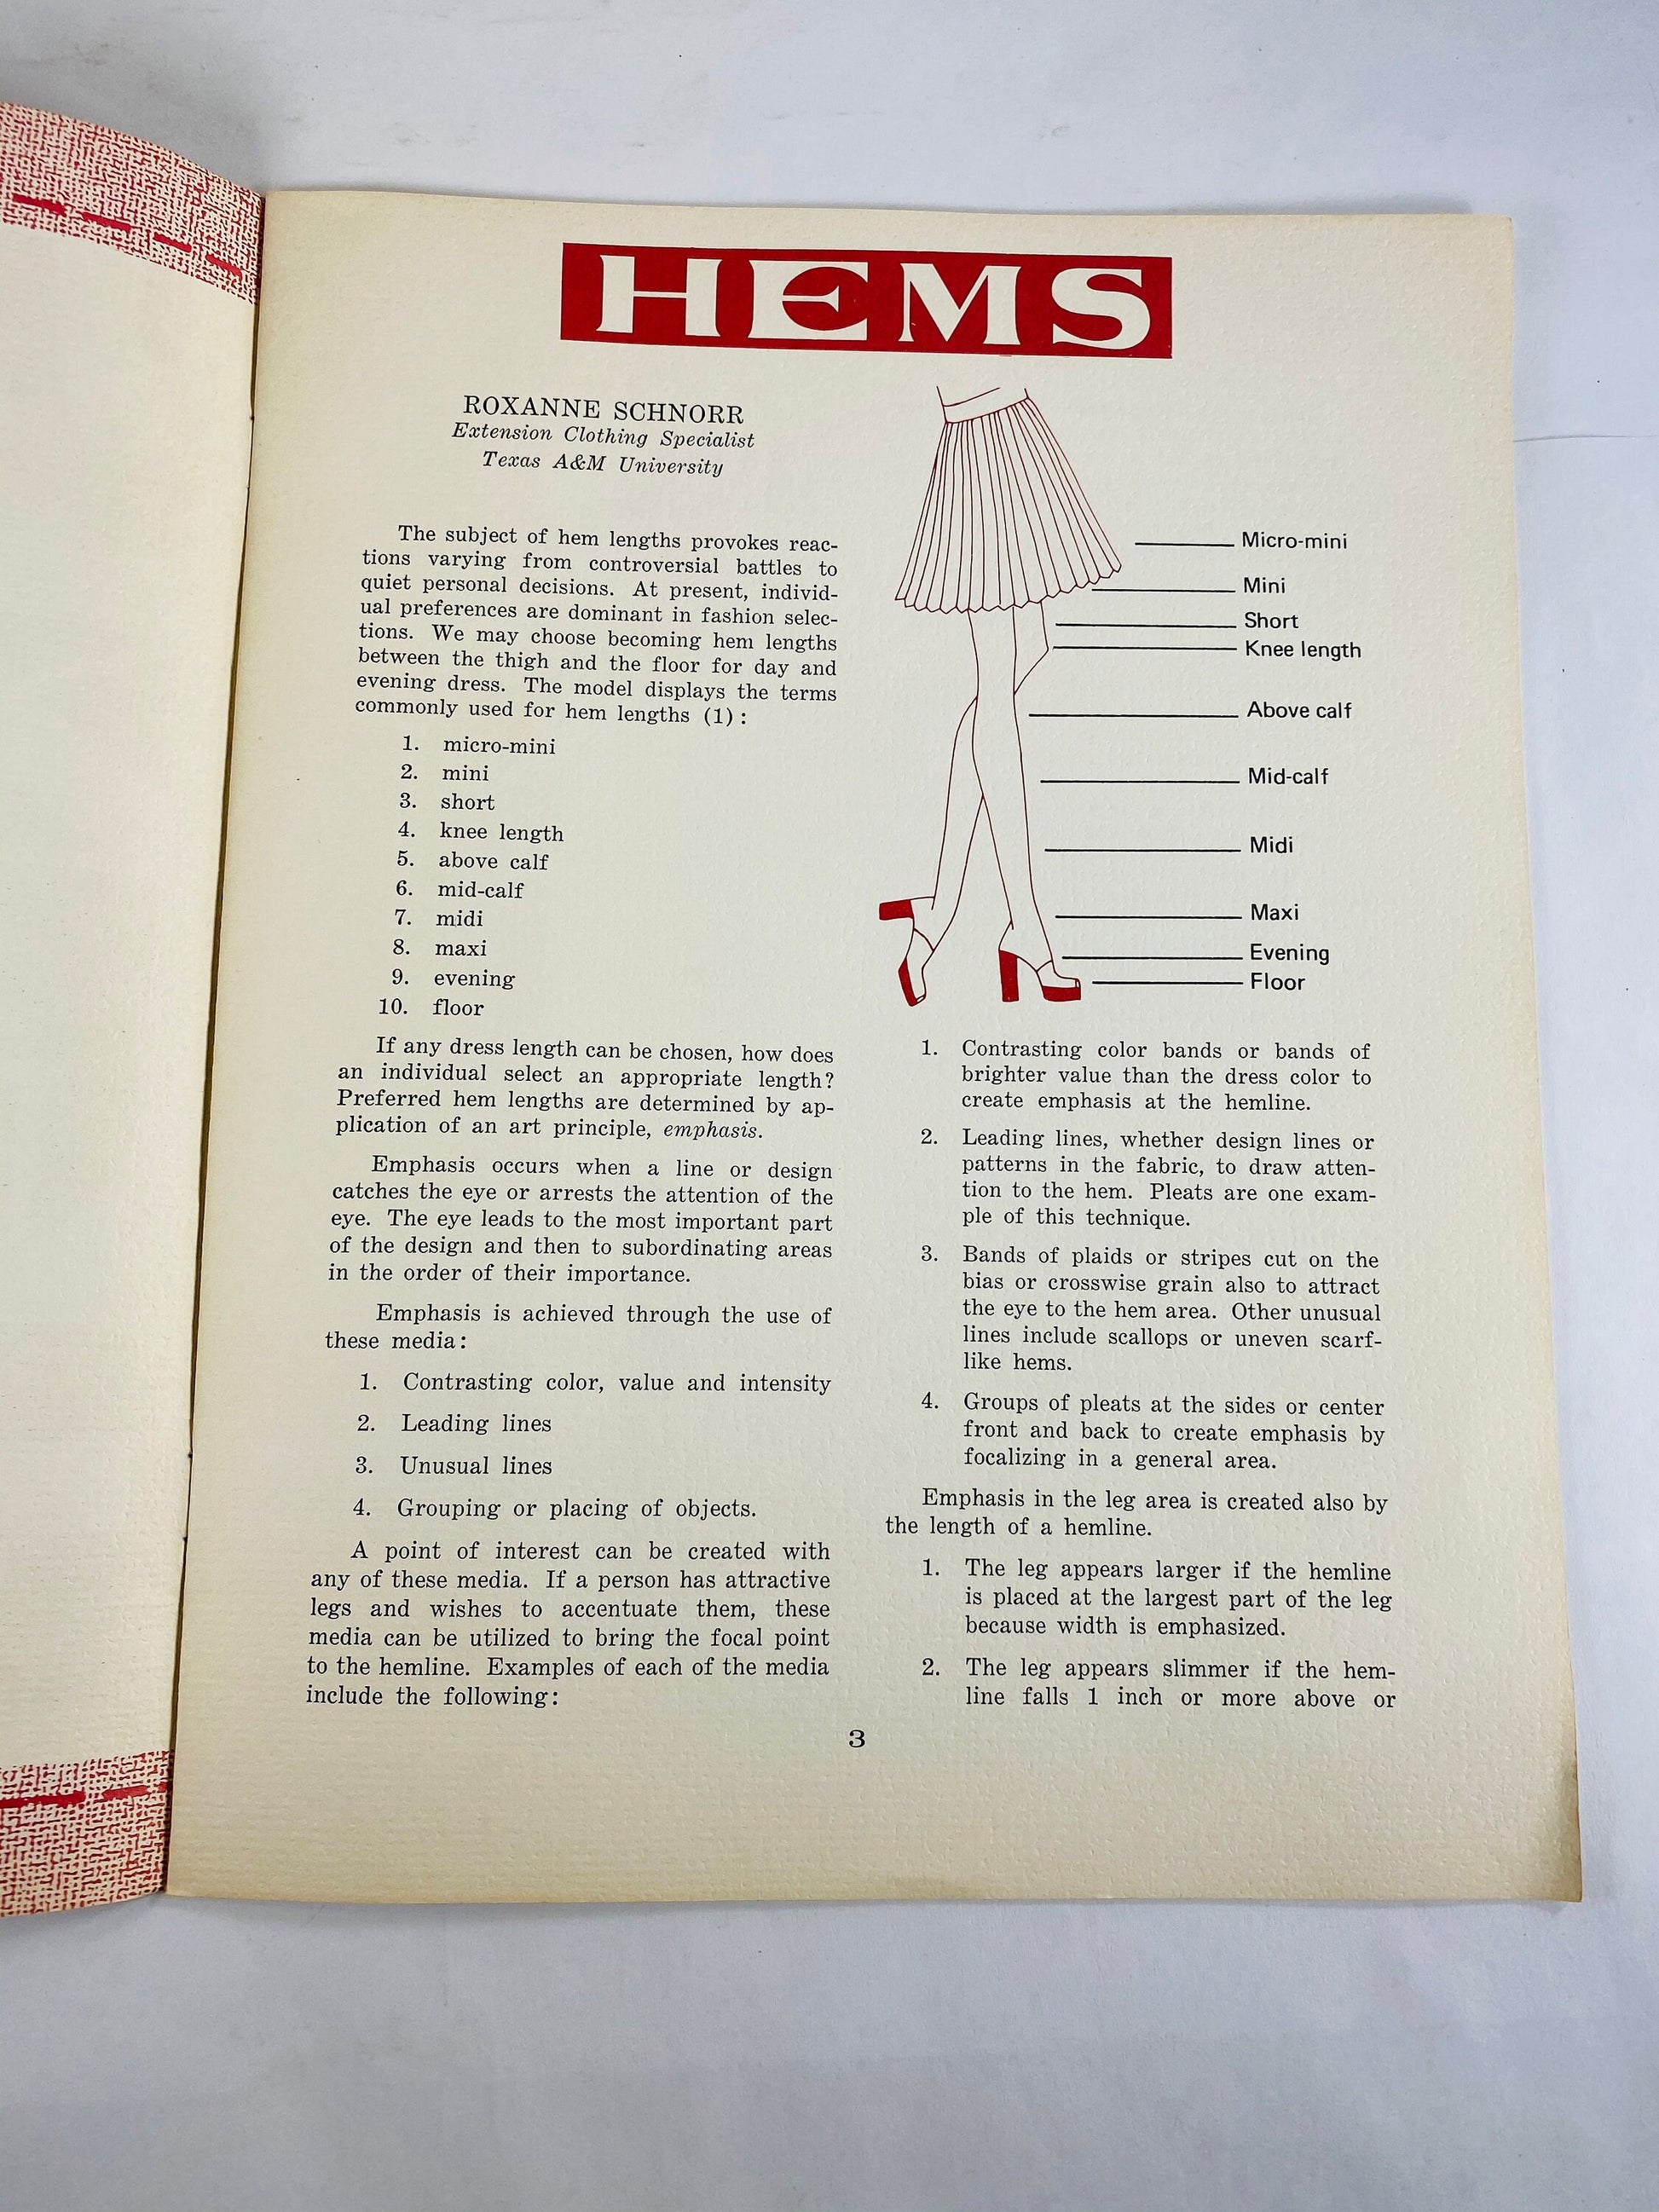 Hems by Roxanne Schnorr Texas A&M University Vintage booklet circa 1972. Collectible sewing book with techniques